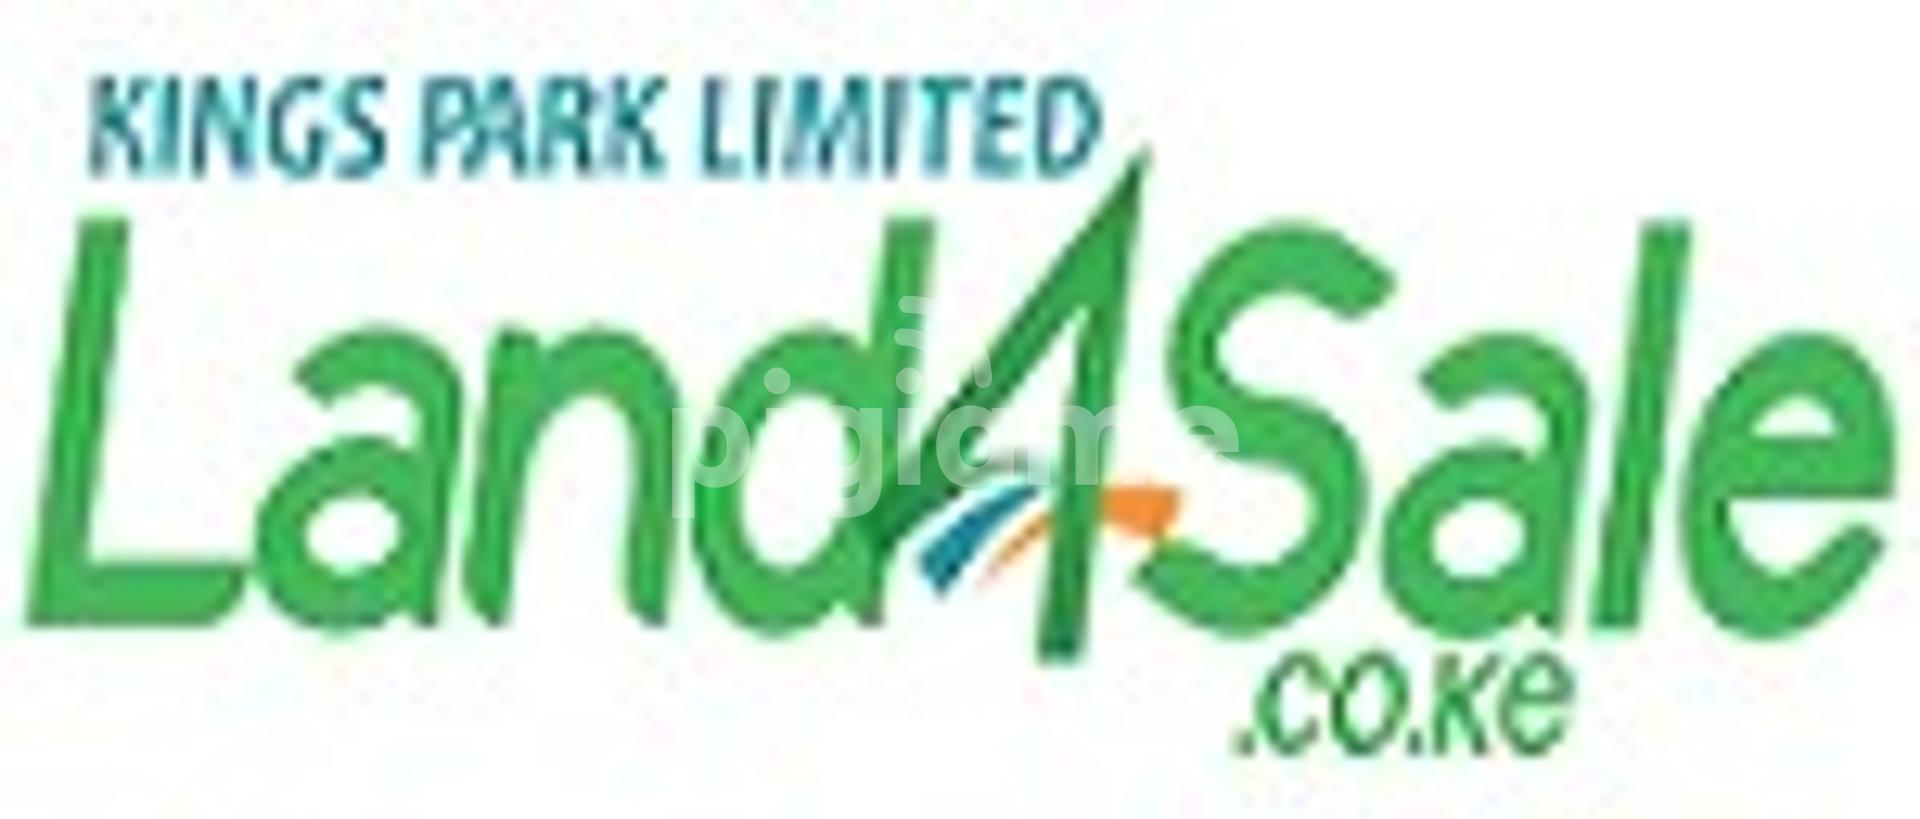 Kings Park Limited